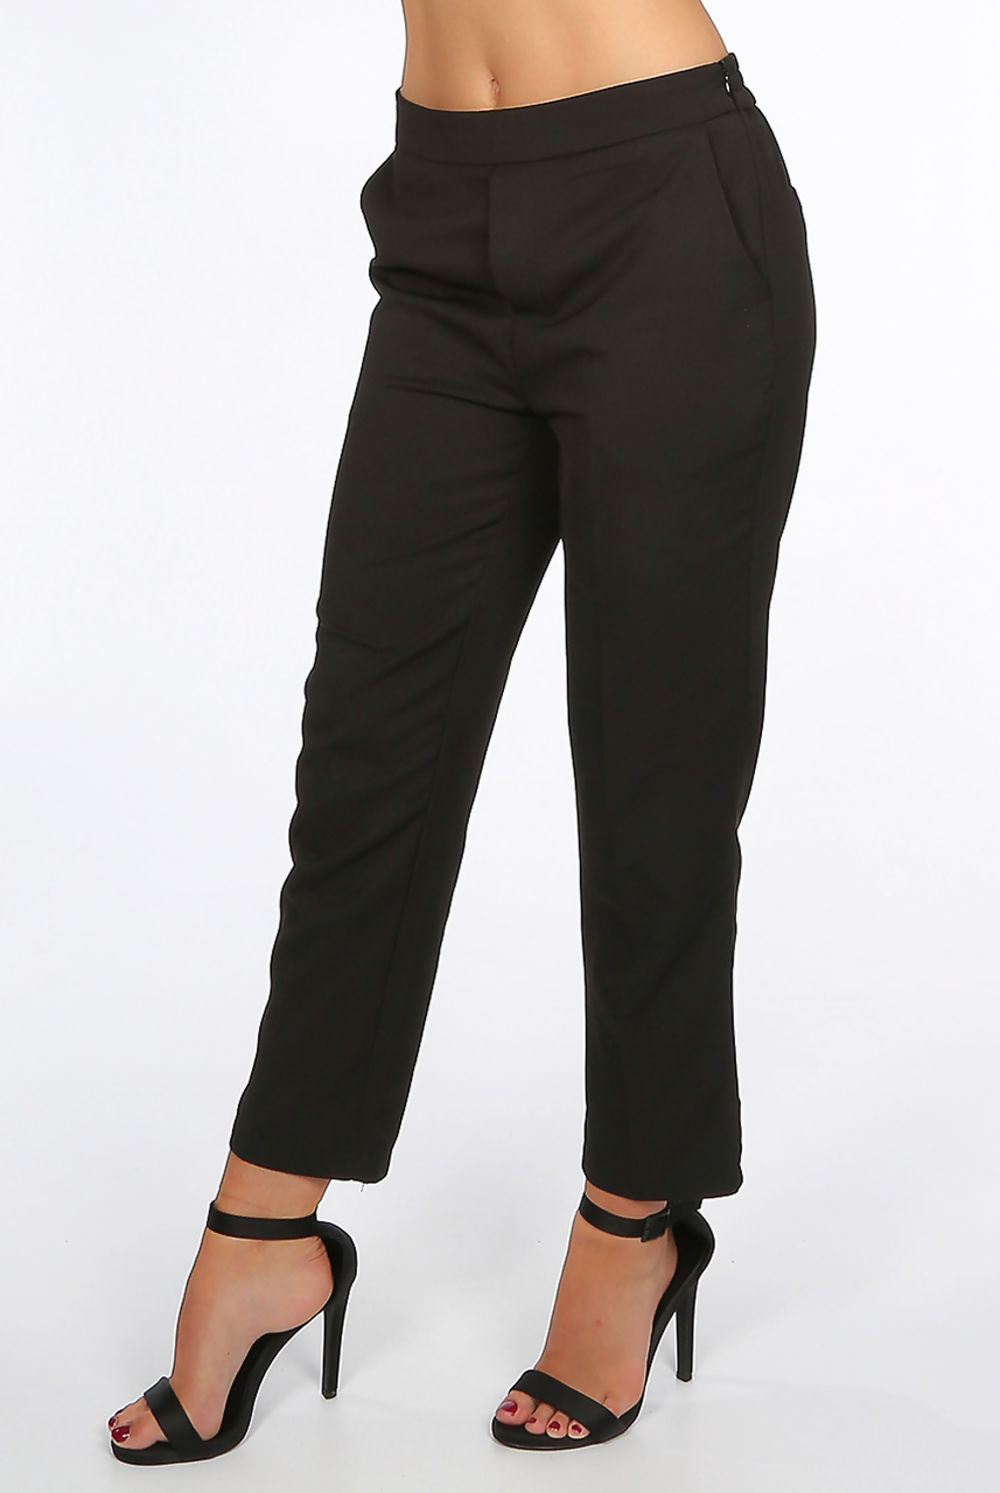 4ever Stunning black trousers. This womens trousers boasts a 3/4 leg and side zip.